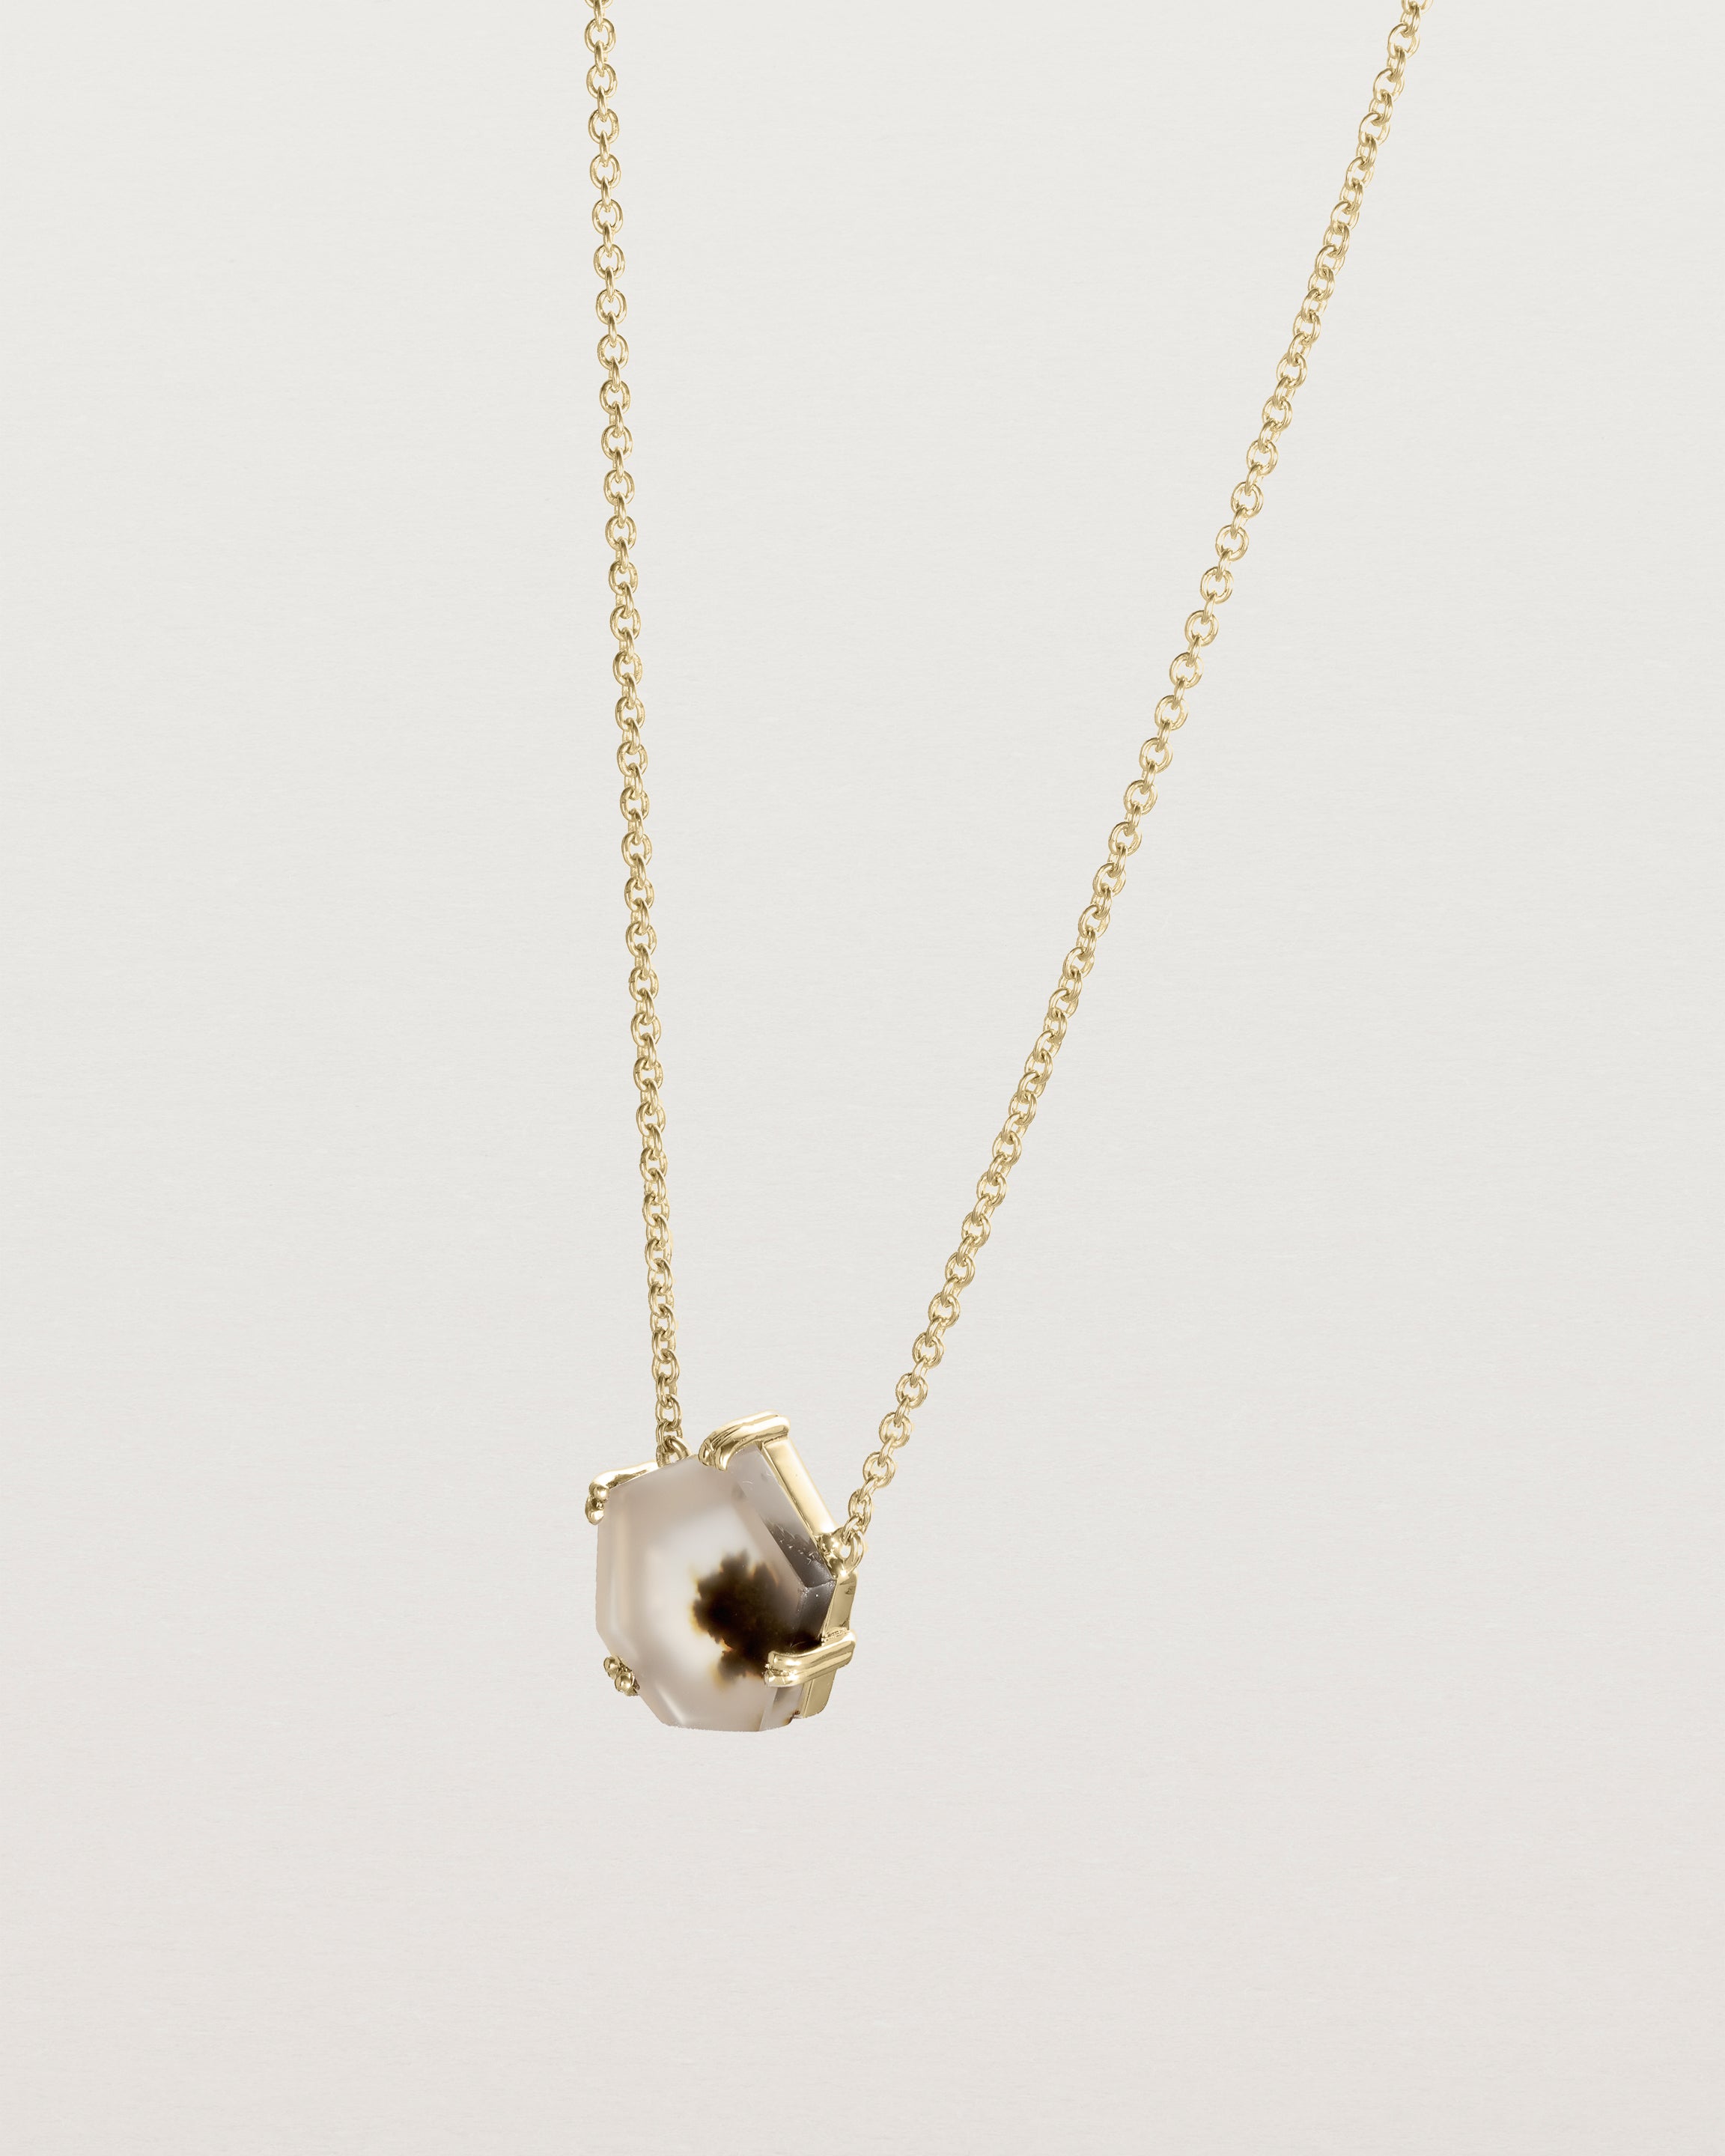 Angled view of the Agate Pendant in yellow gold.